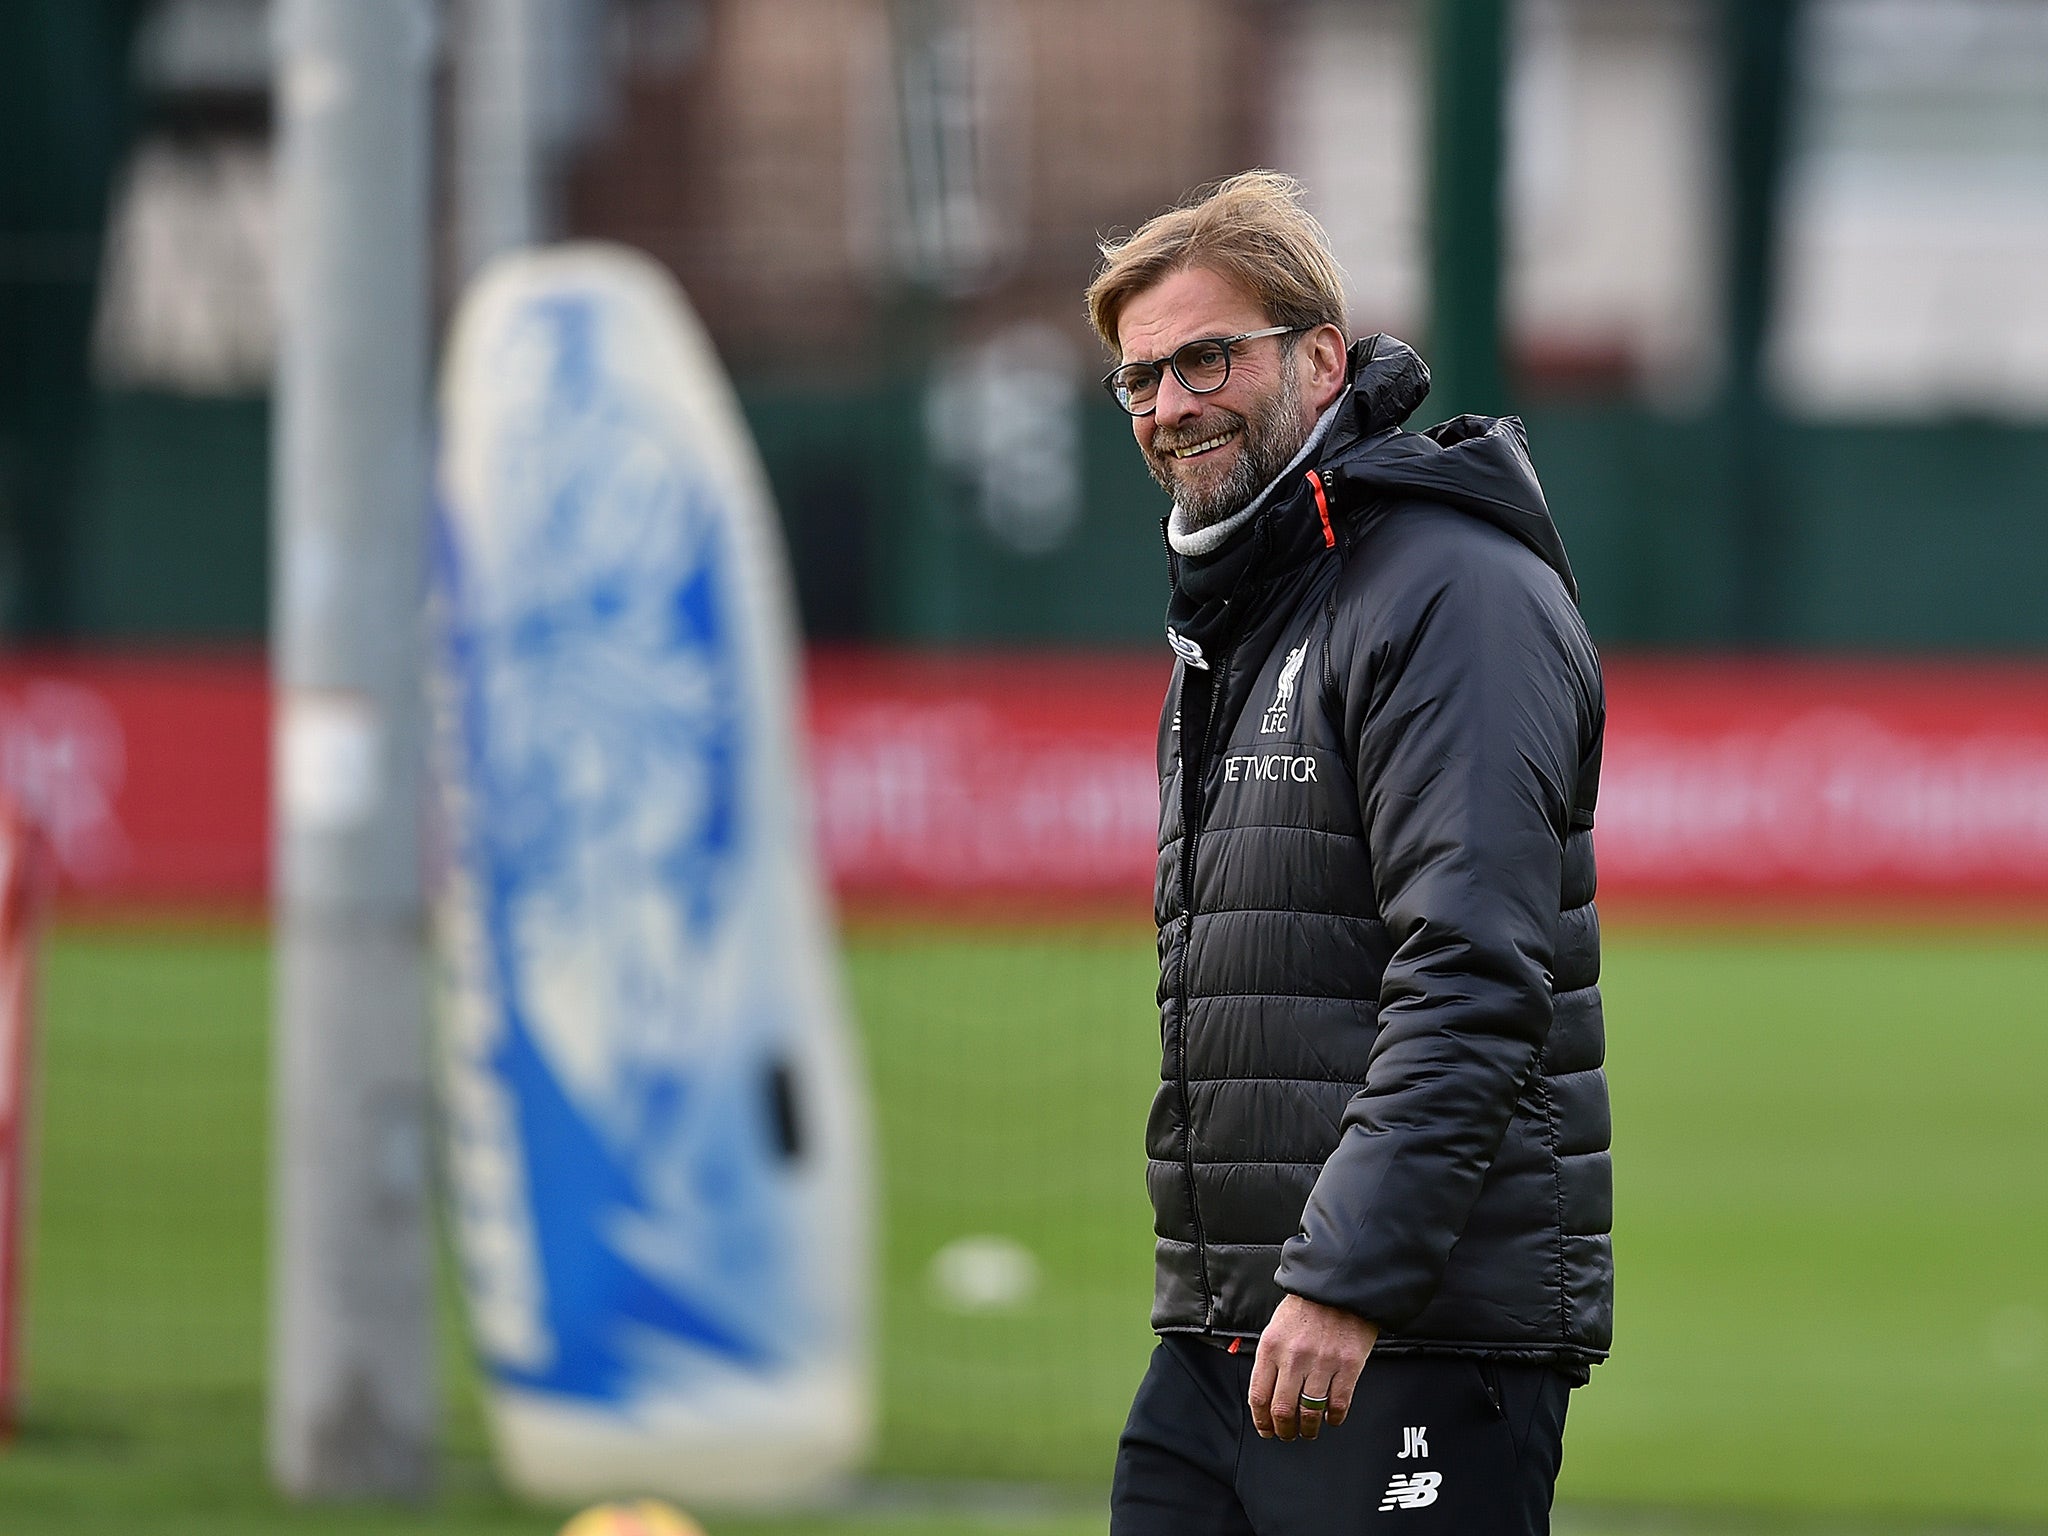 Klopp will hope his side can bounce back from defeat at Bournemouth